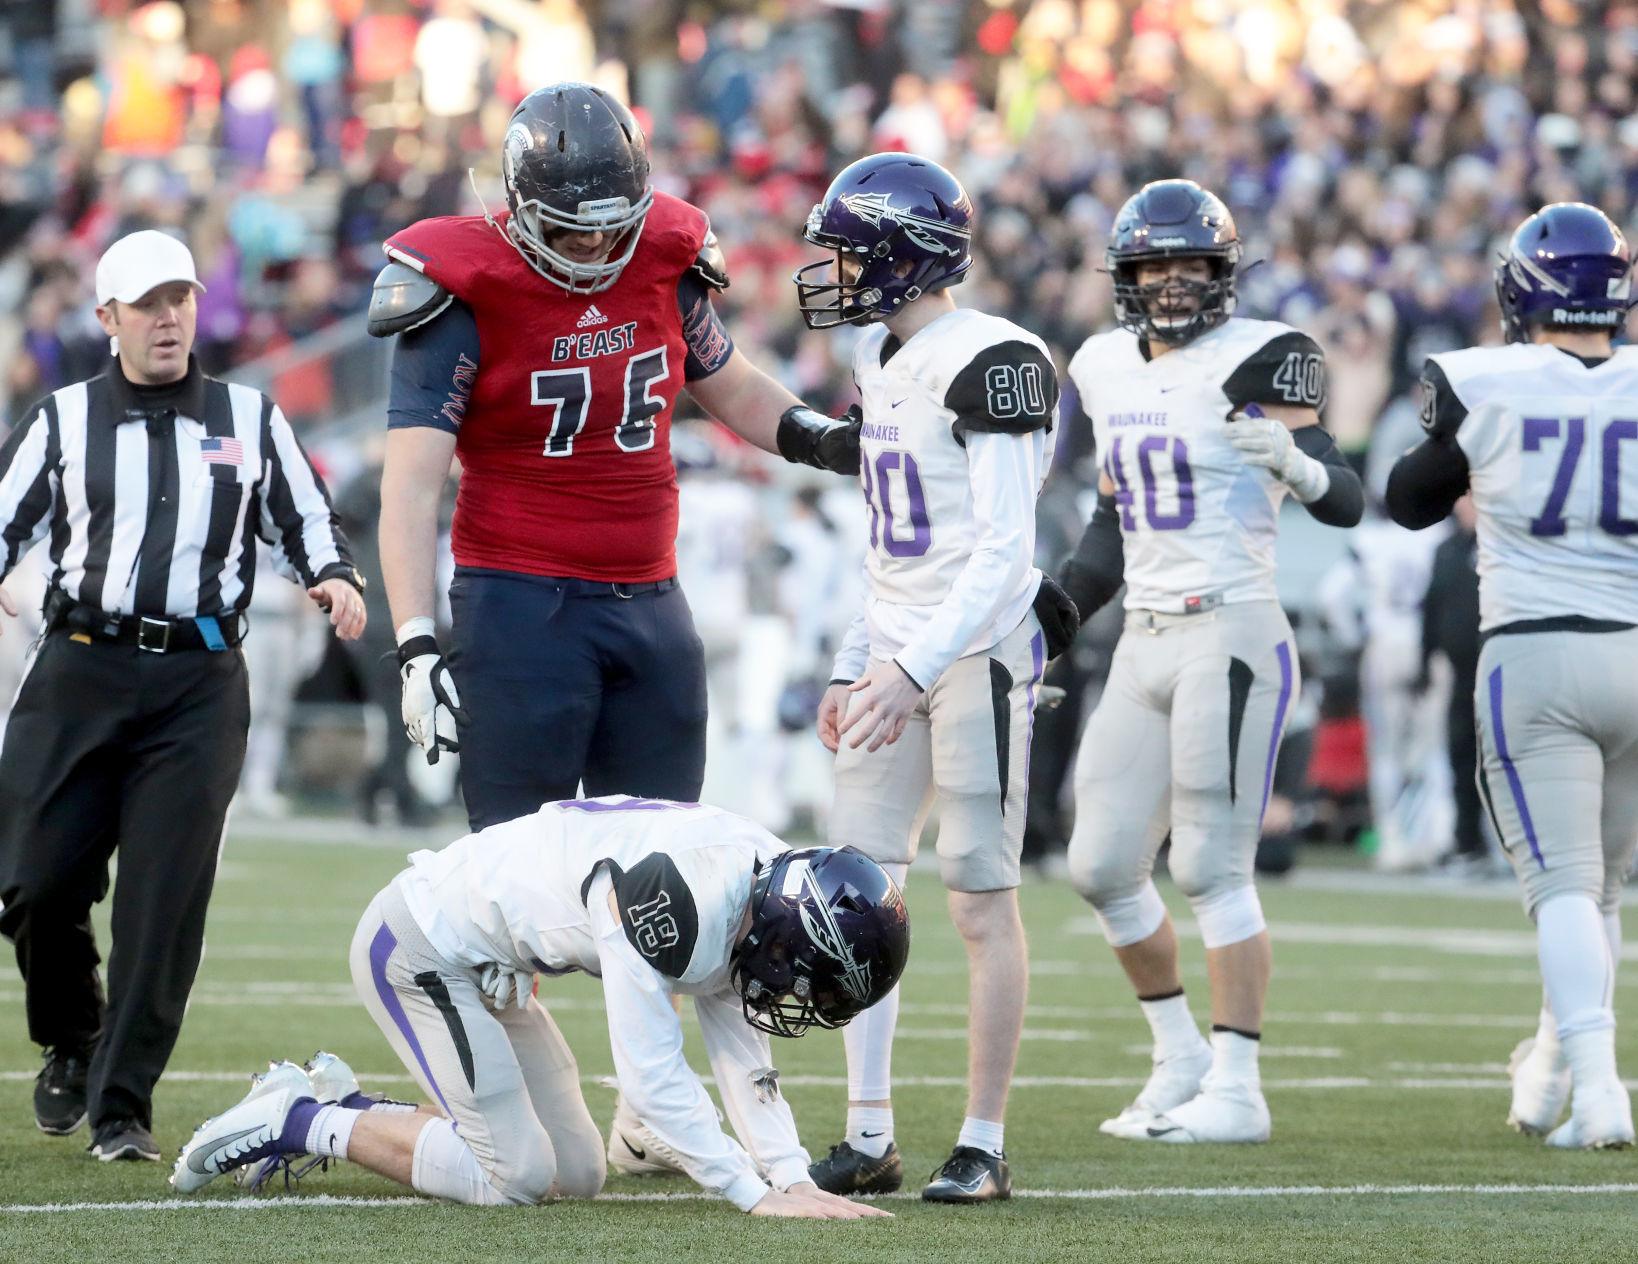 Waunakee comes up short in Division 2 state football title game High